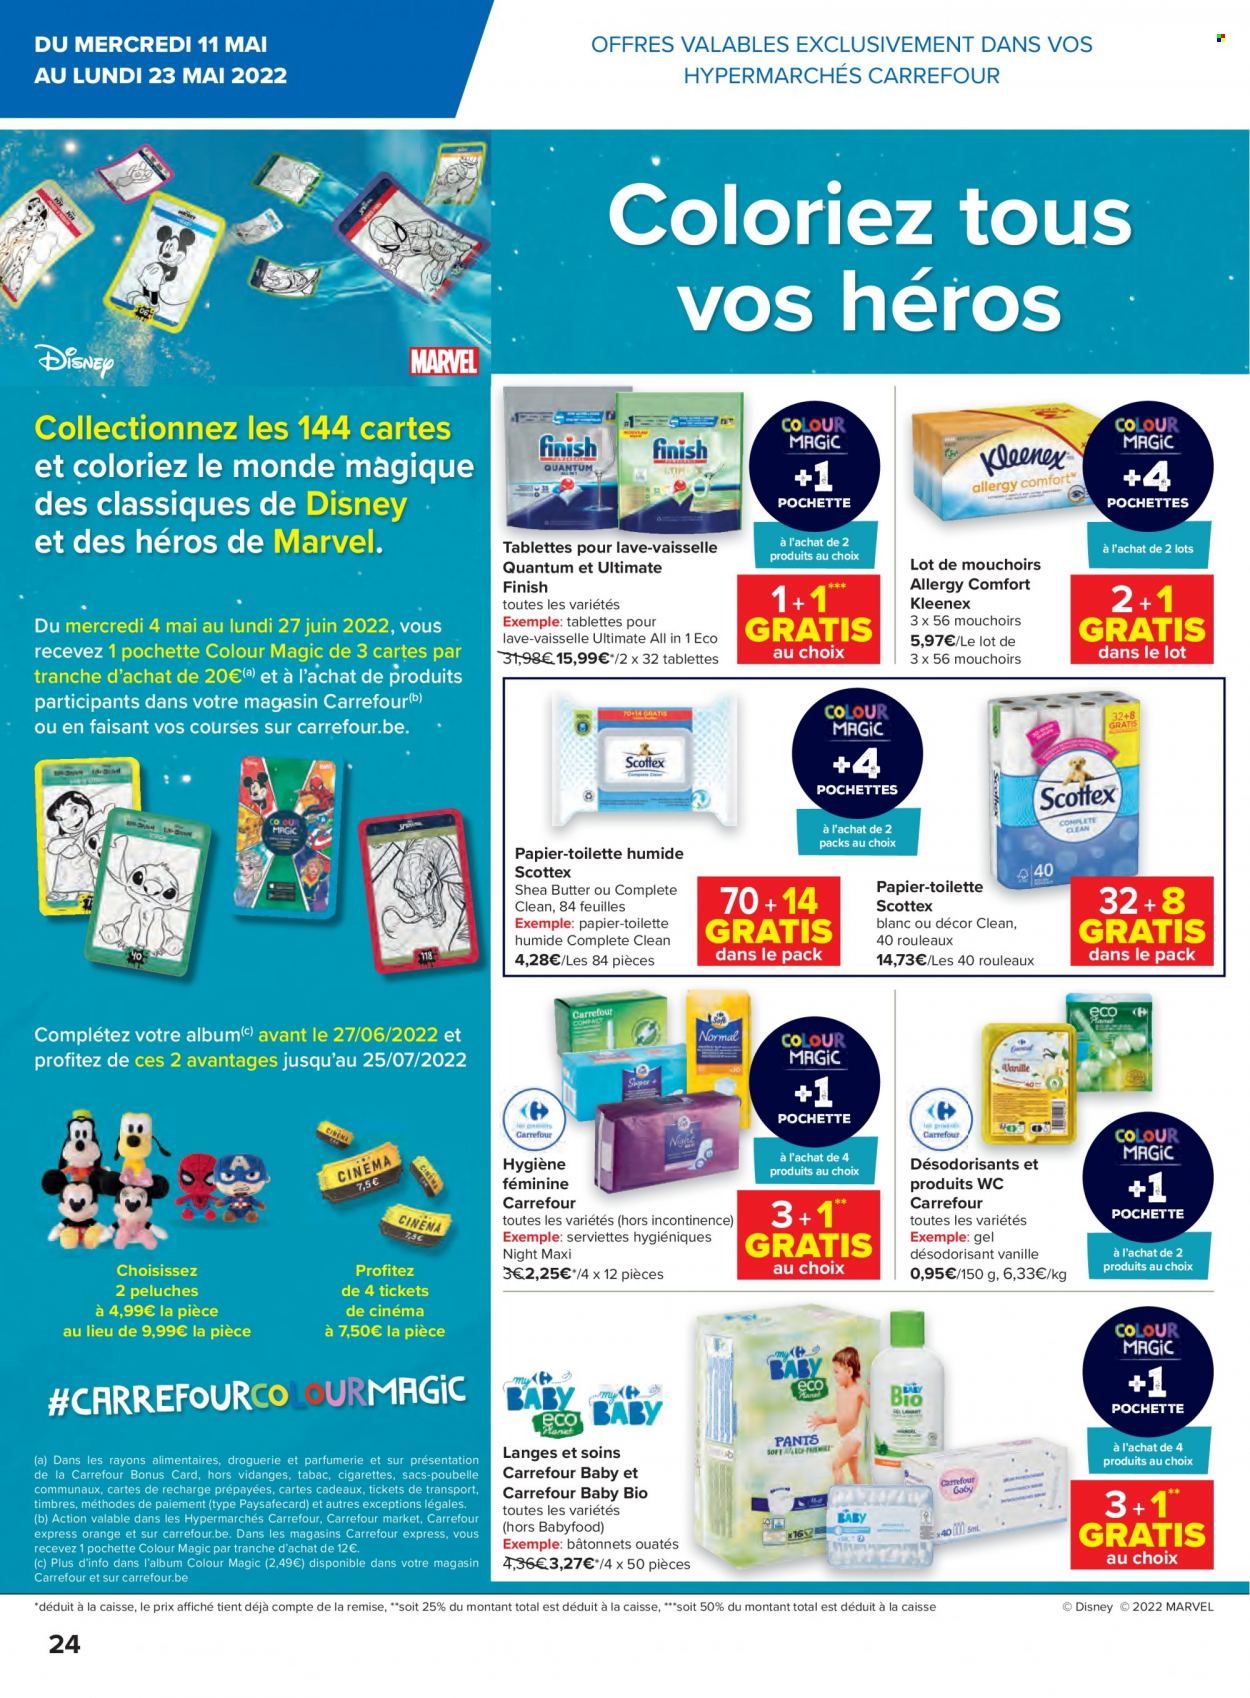 Catalogue Carrefour hypermarkt - 11.5.2022 - 23.5.2022. Page 24.